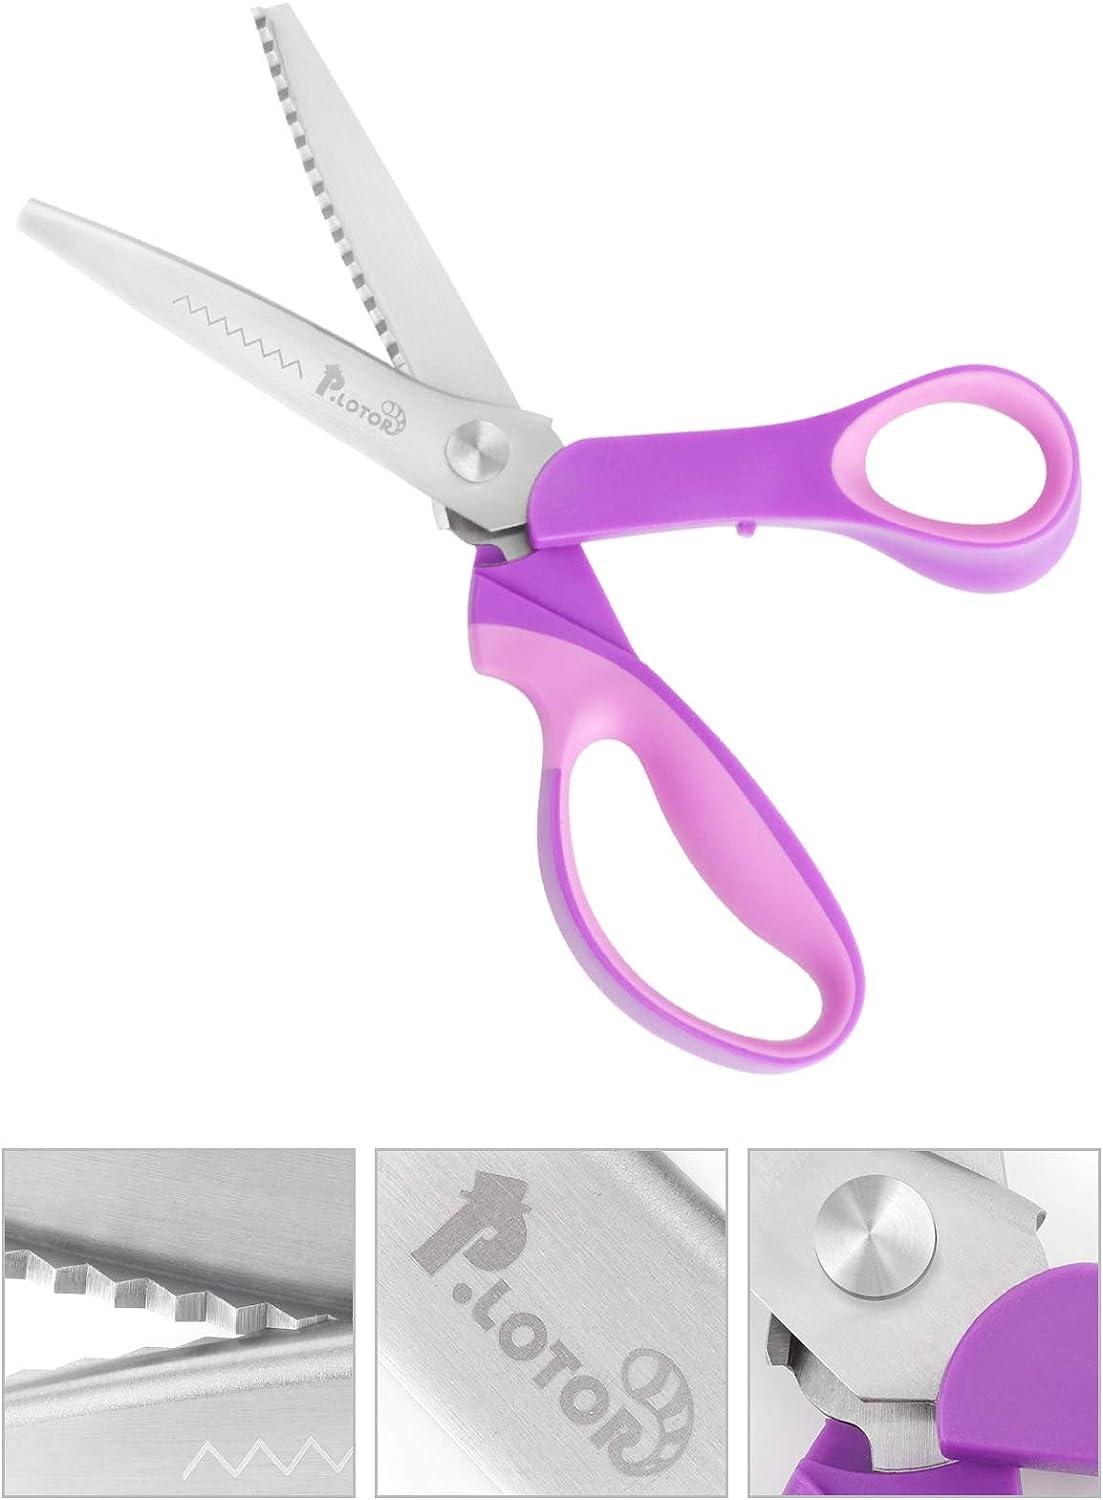 Scalloped Pinking Shears, P.LOTOR 9.3 Inches Stainless Steel